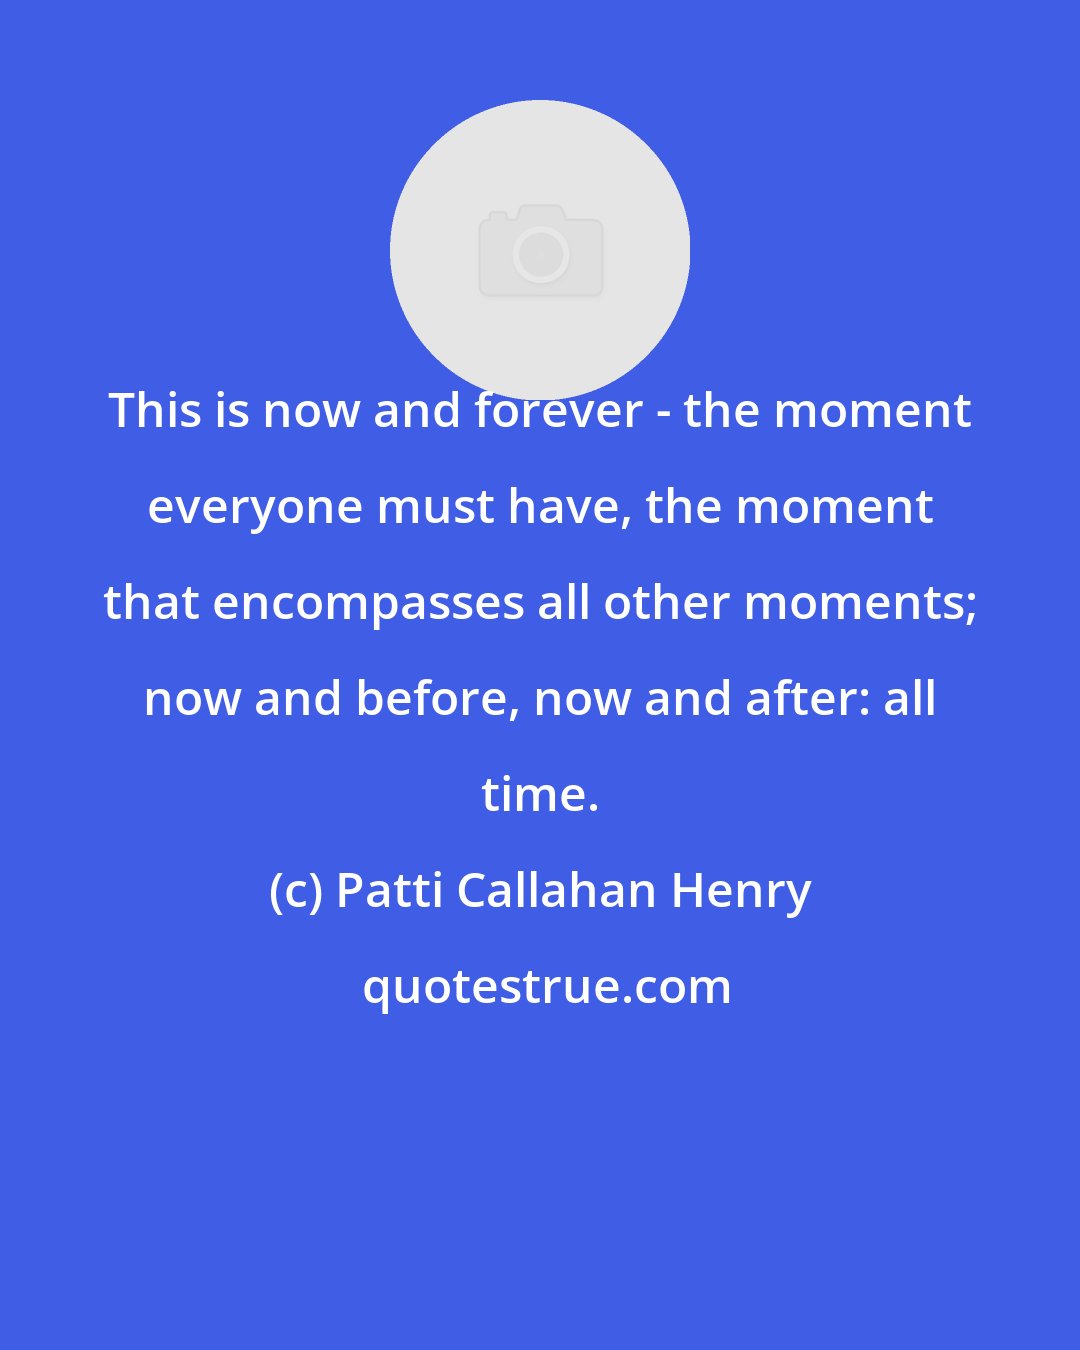 Patti Callahan Henry: This is now and forever - the moment everyone must have, the moment that encompasses all other moments; now and before, now and after: all time.